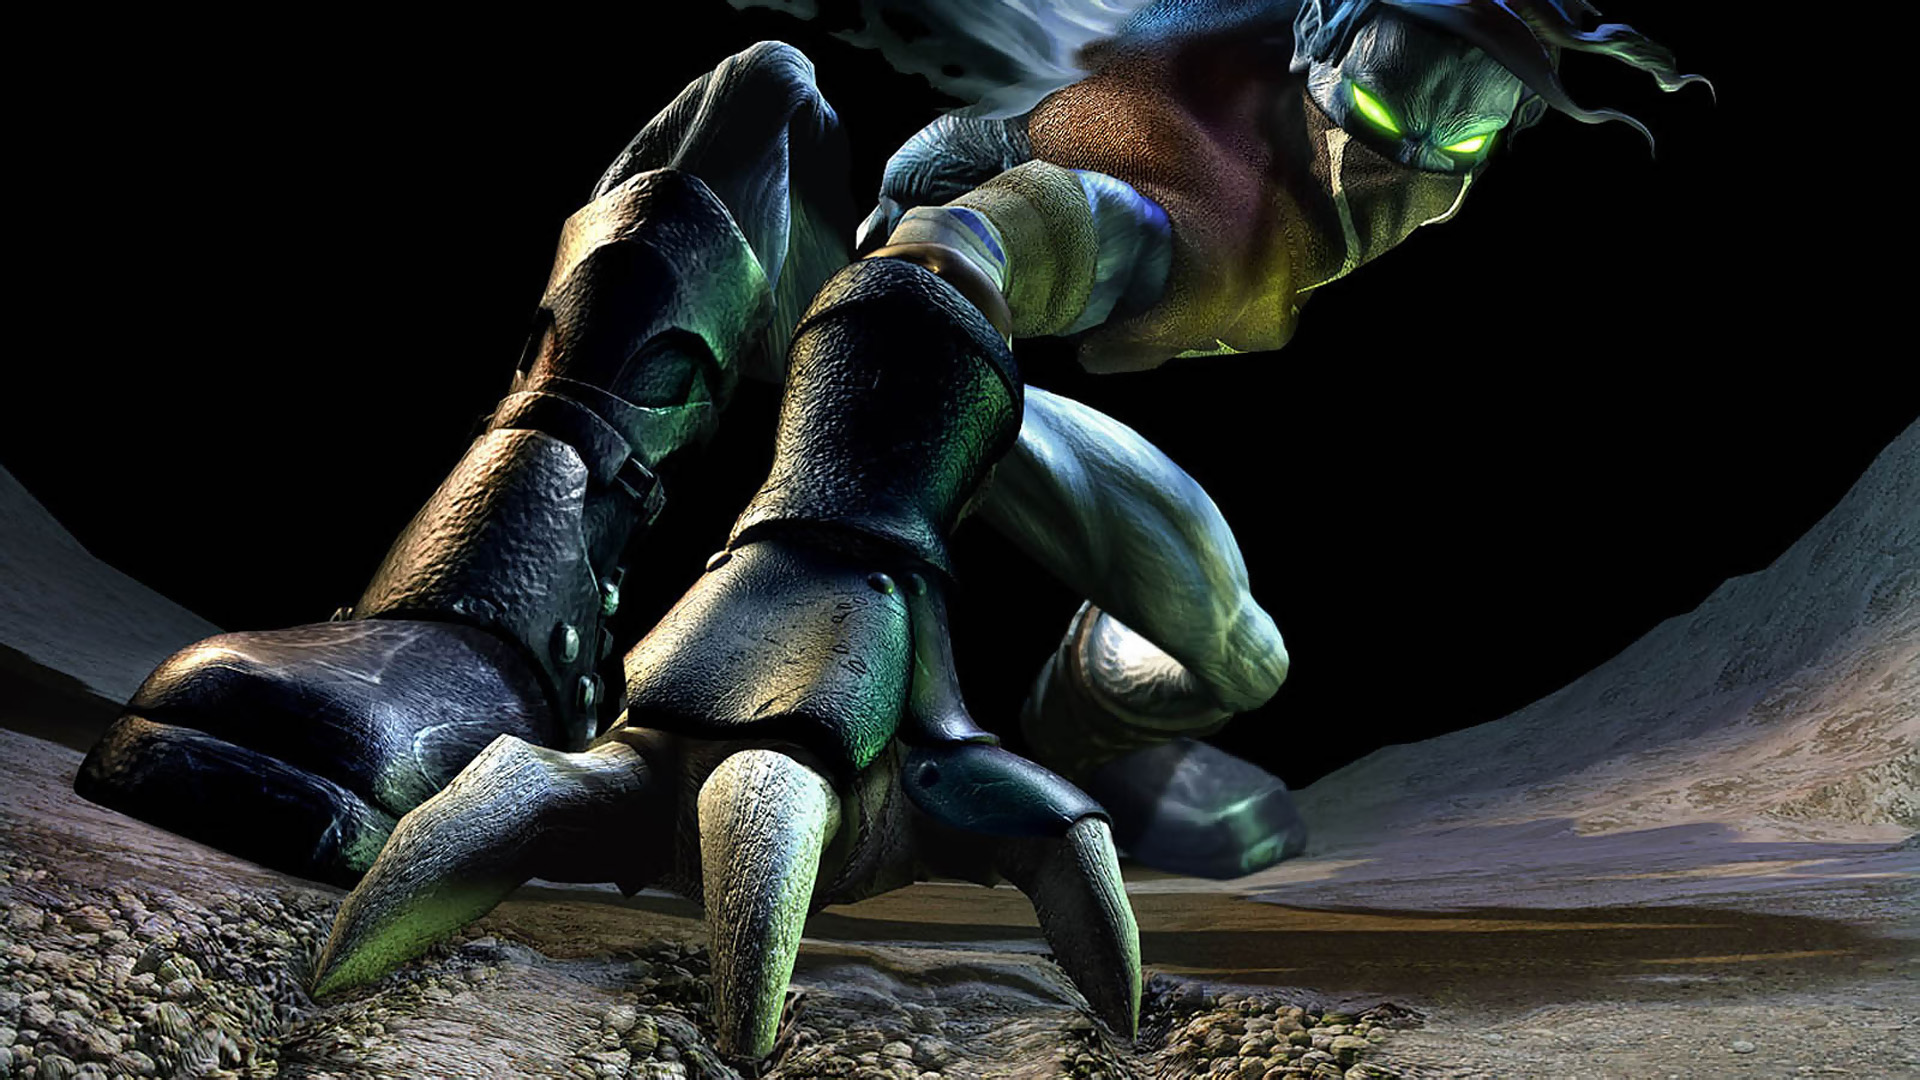 Video Game Legacy Of Kain: Soul Reaver HD Wallpaper | Background Image